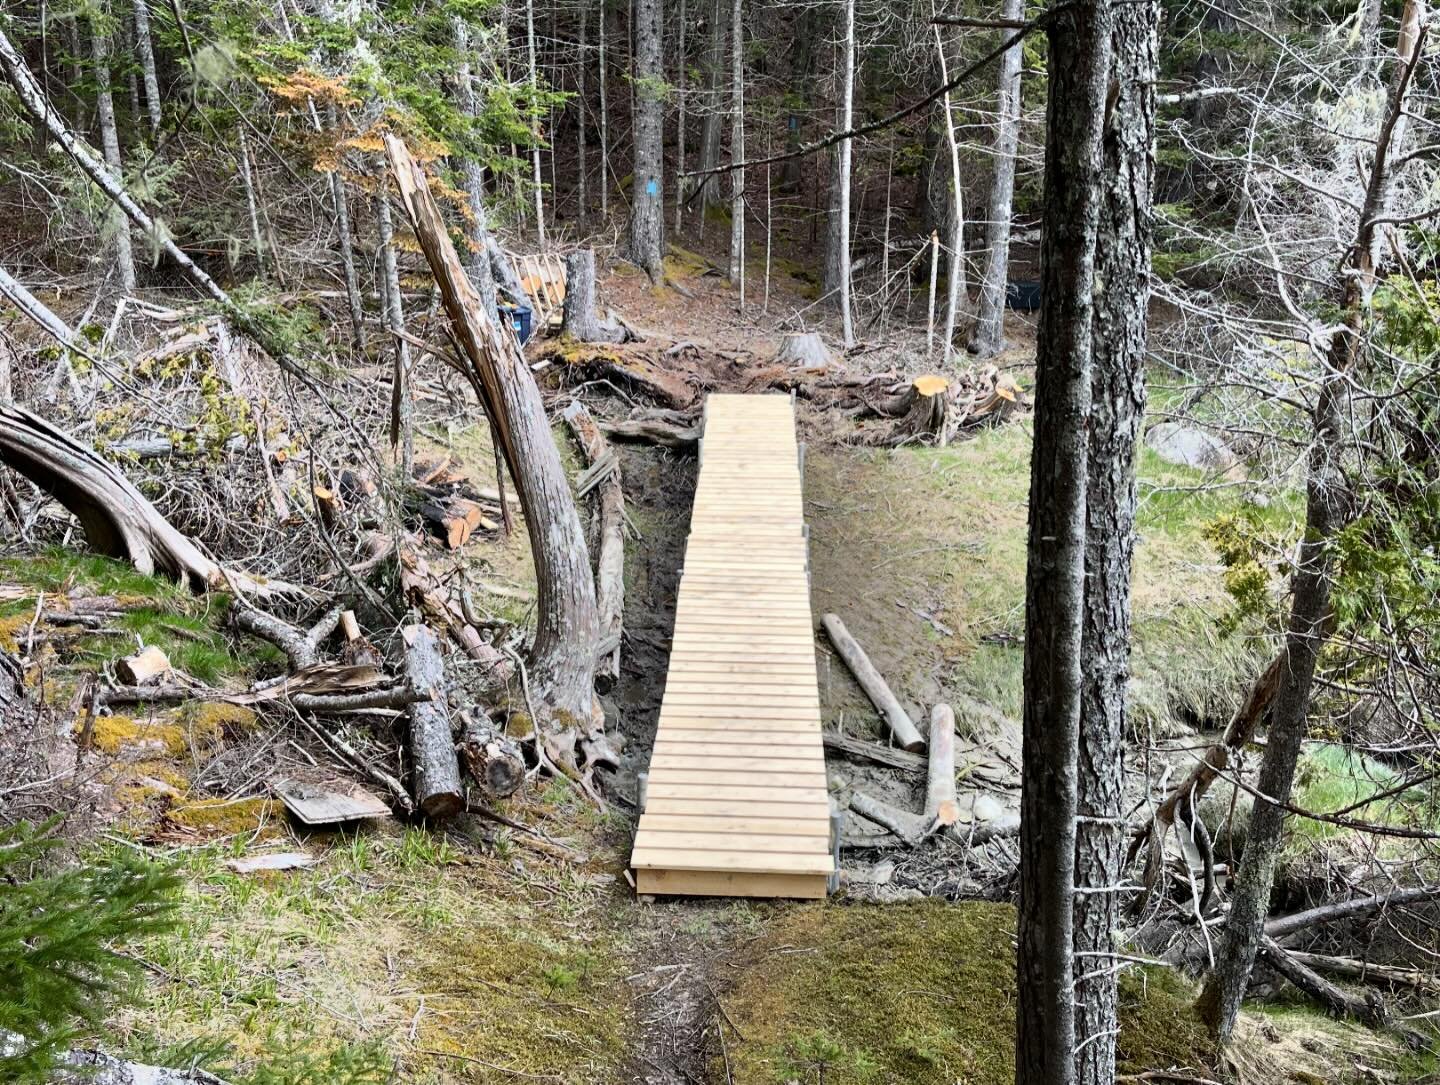 1/3 bridges replaced at the Herbert Preserve. This one was tricky, sometimes we have a hard time driving the posts into Islesboro&rsquo;s often-rocky soil to build our bridges and boardwalks, but not here. Some of these posts are 10&rsquo; long, with